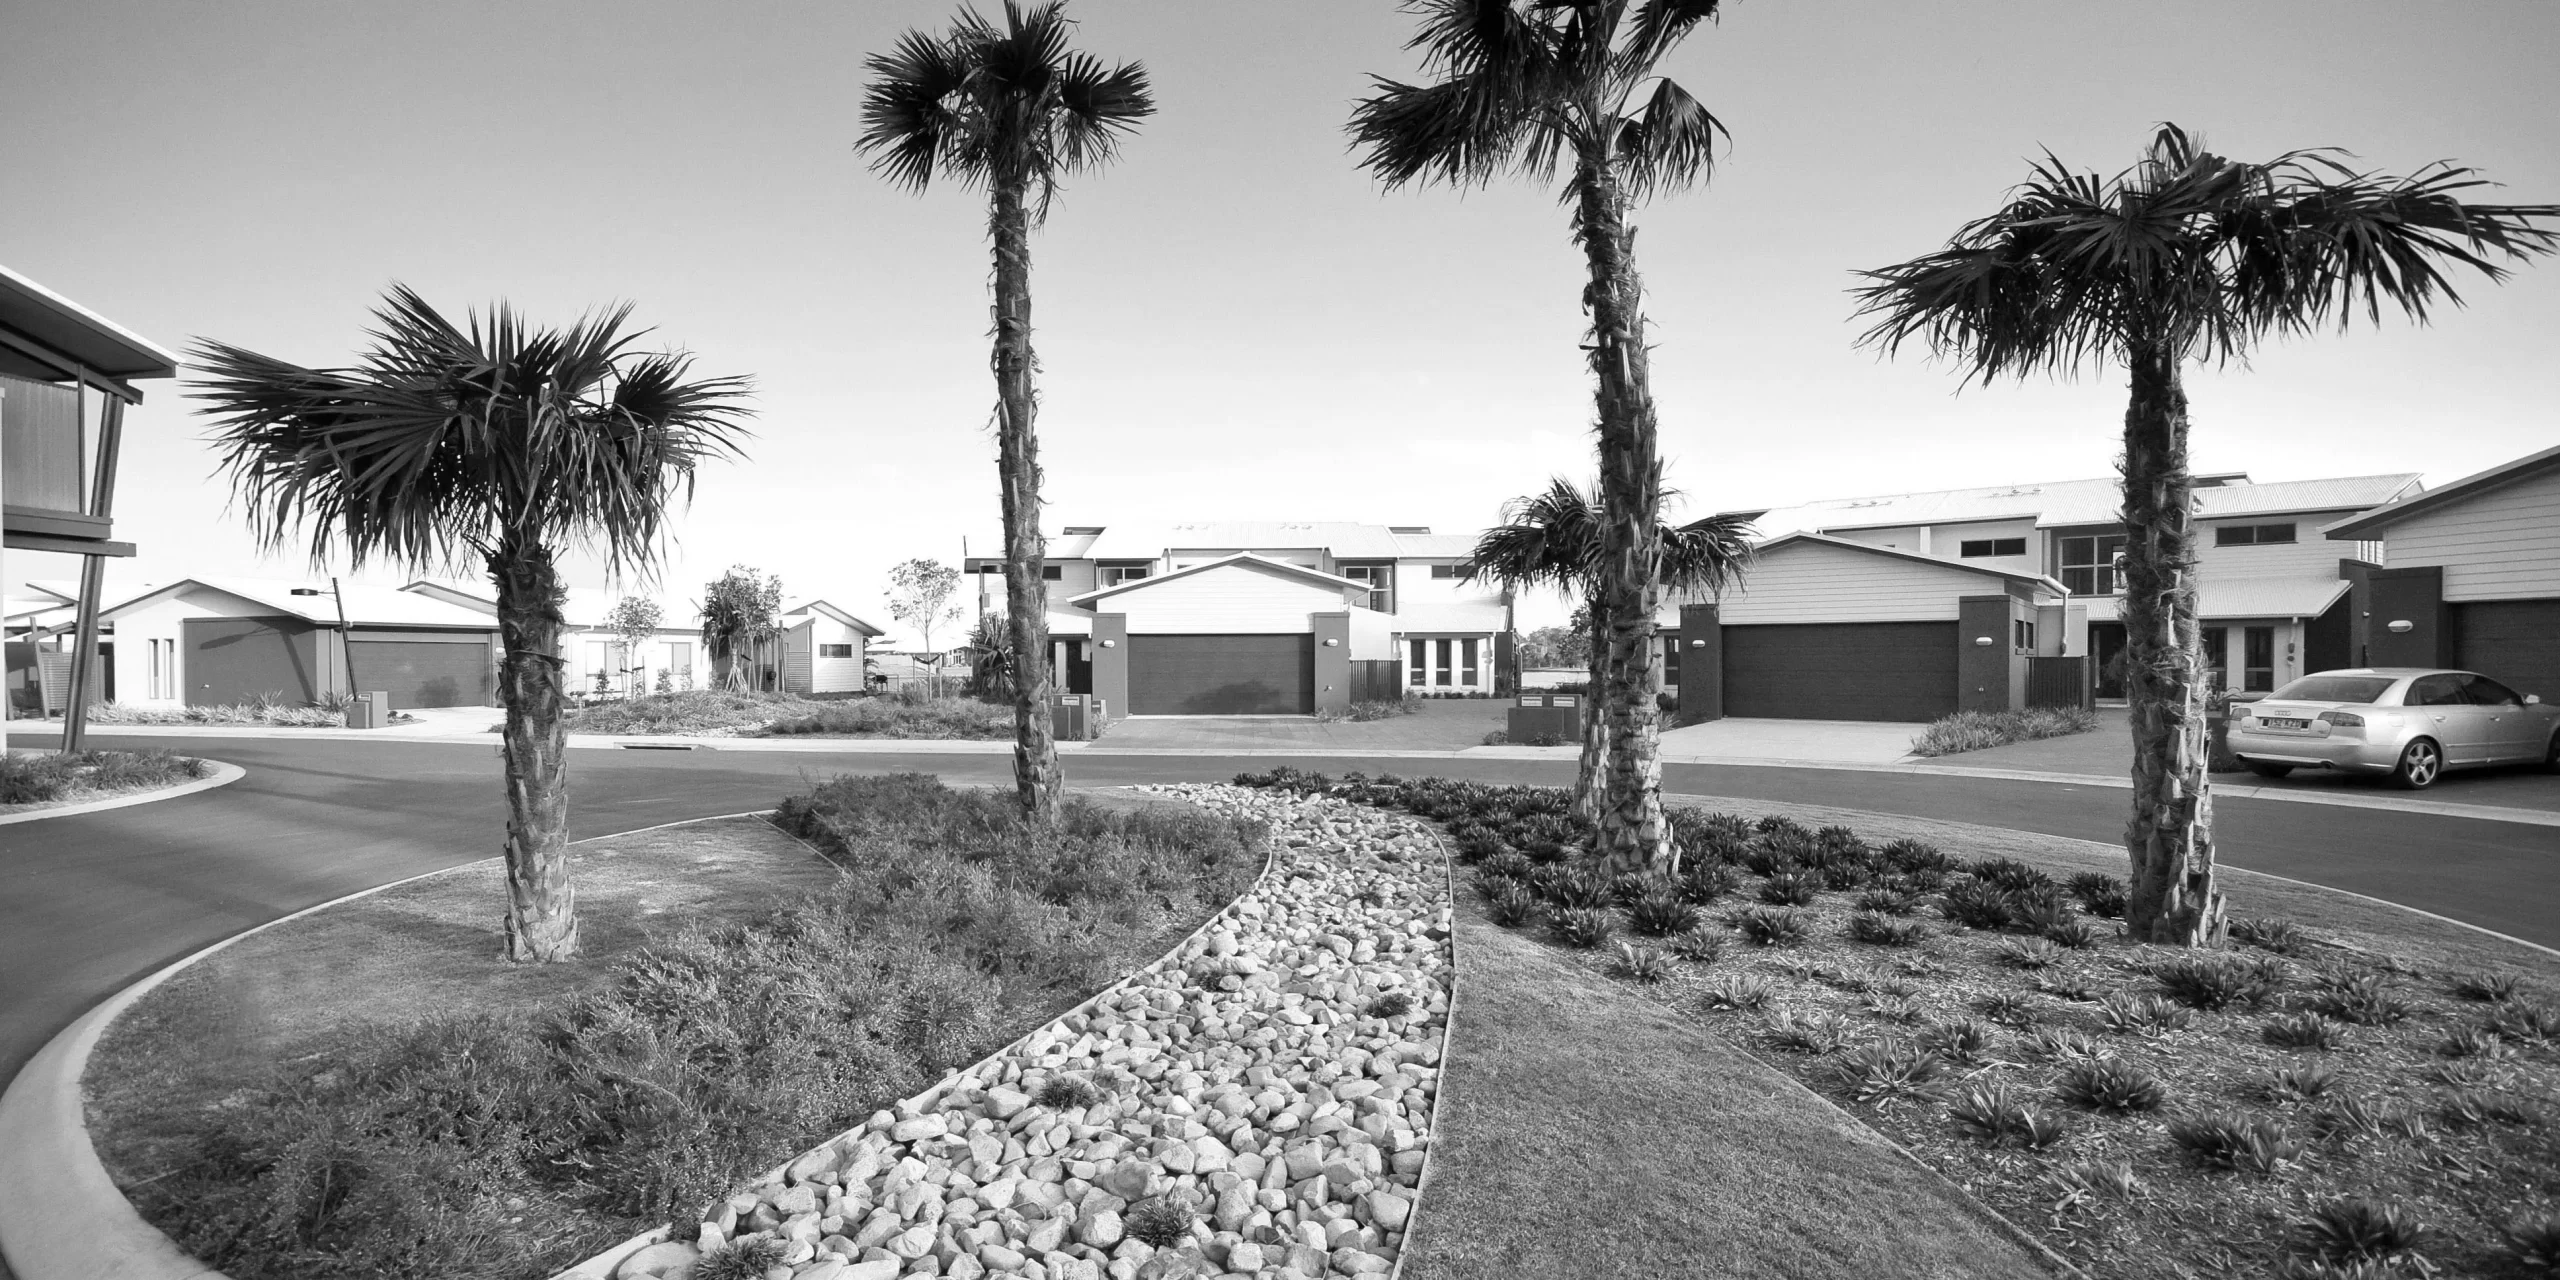 Palms trees in a roundabout with a decorative stone feature to the center in black and white